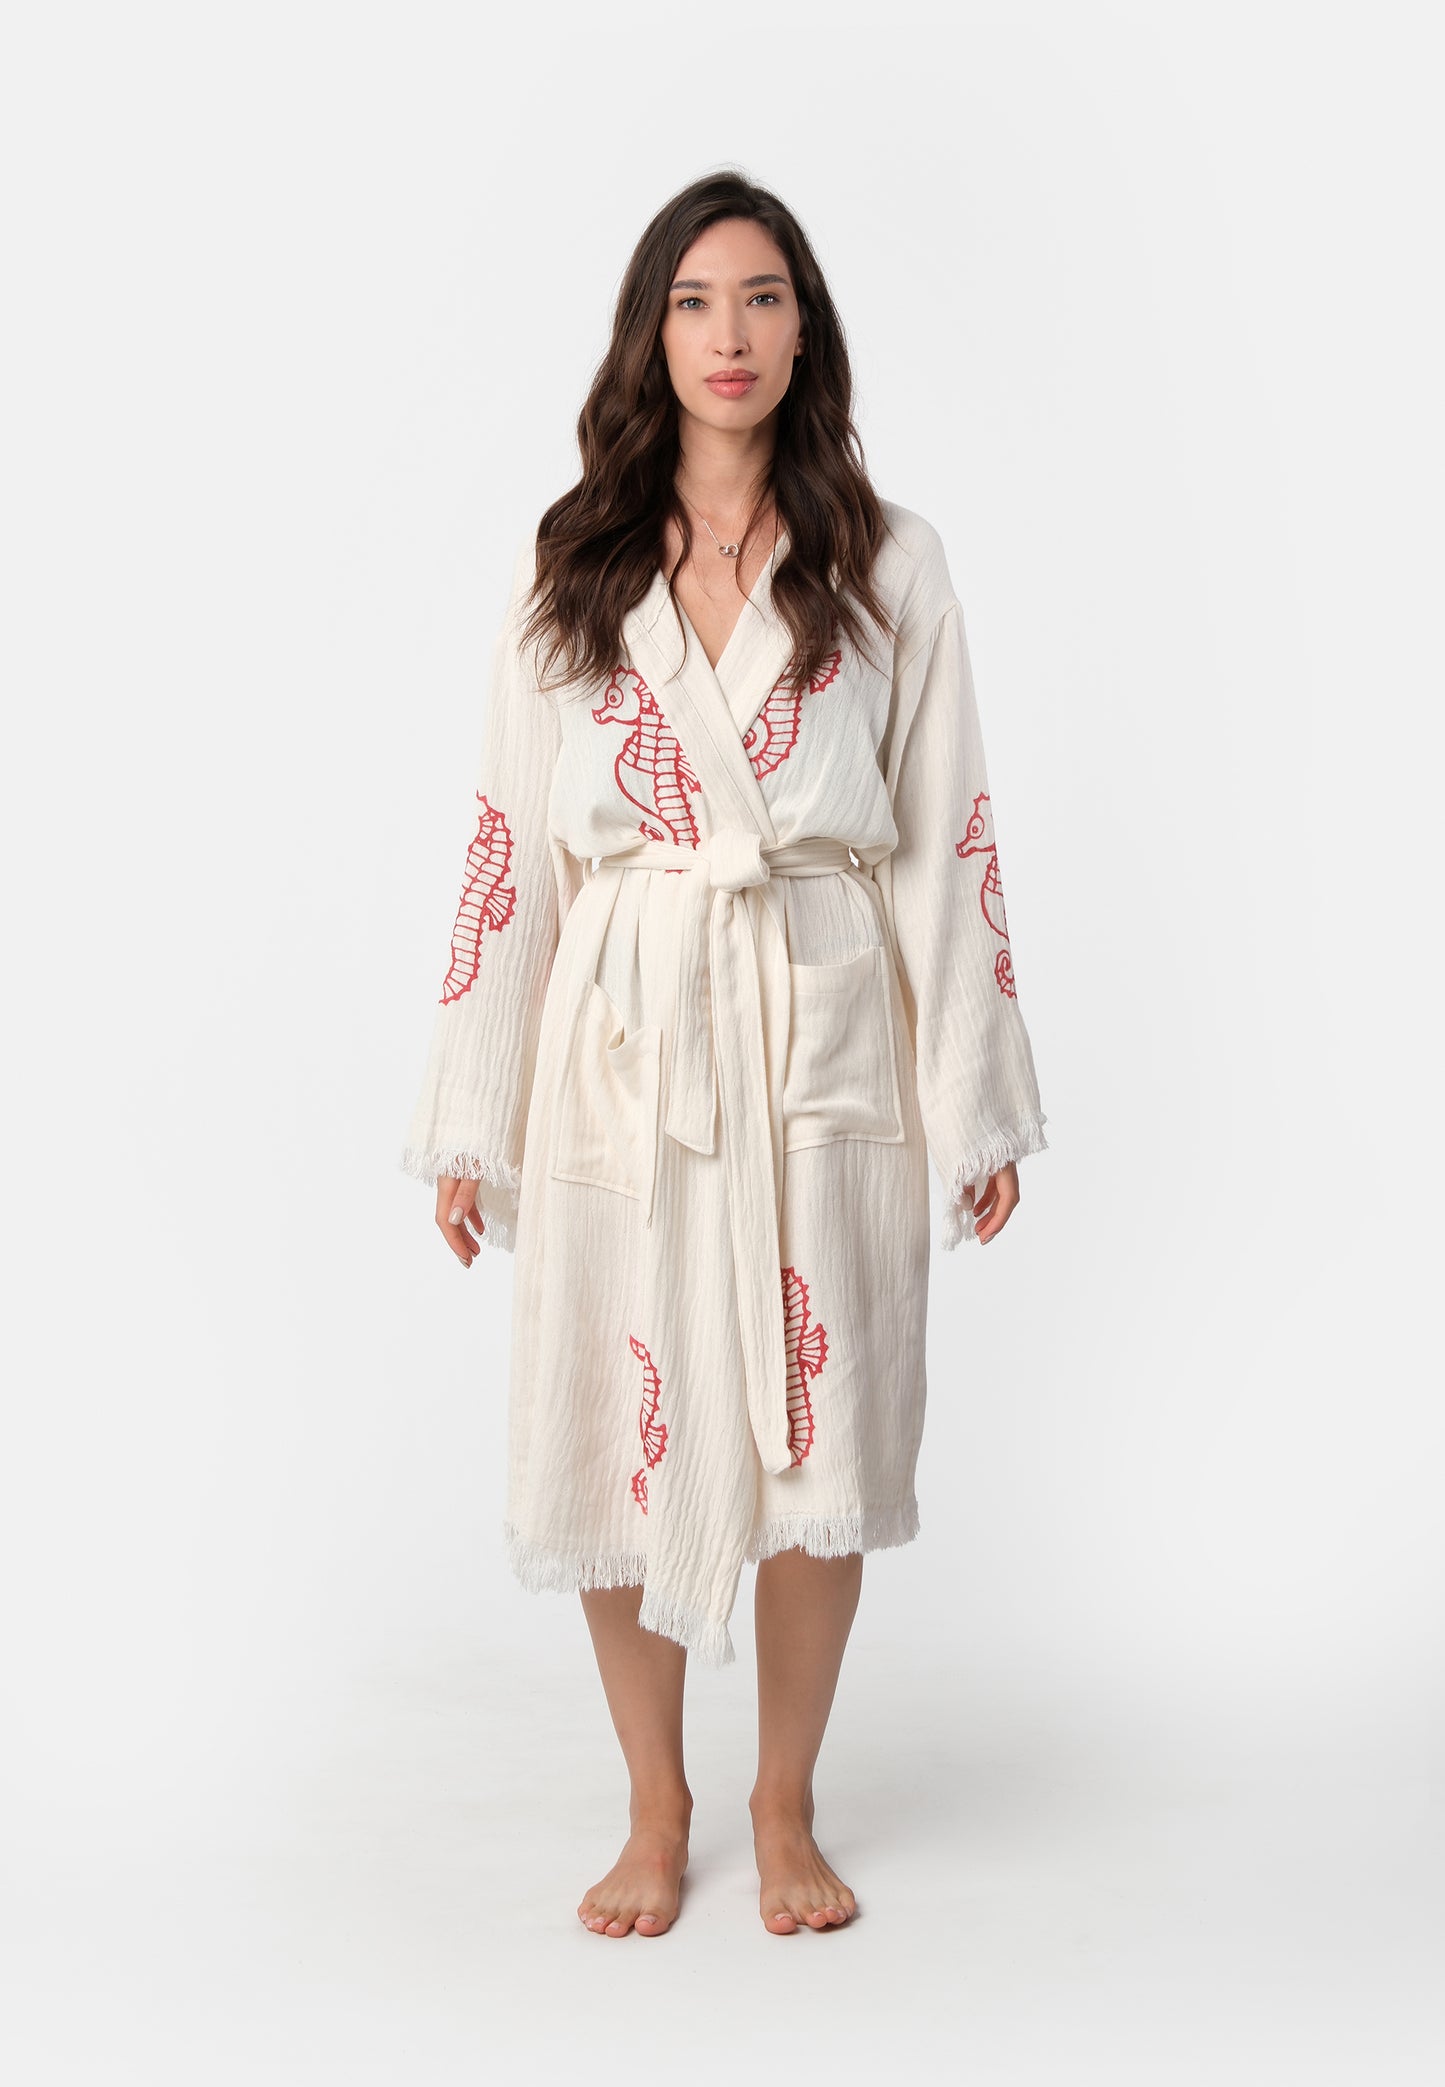 Nuvola Luxe Robe - Seahorse Red Wooden Stamp